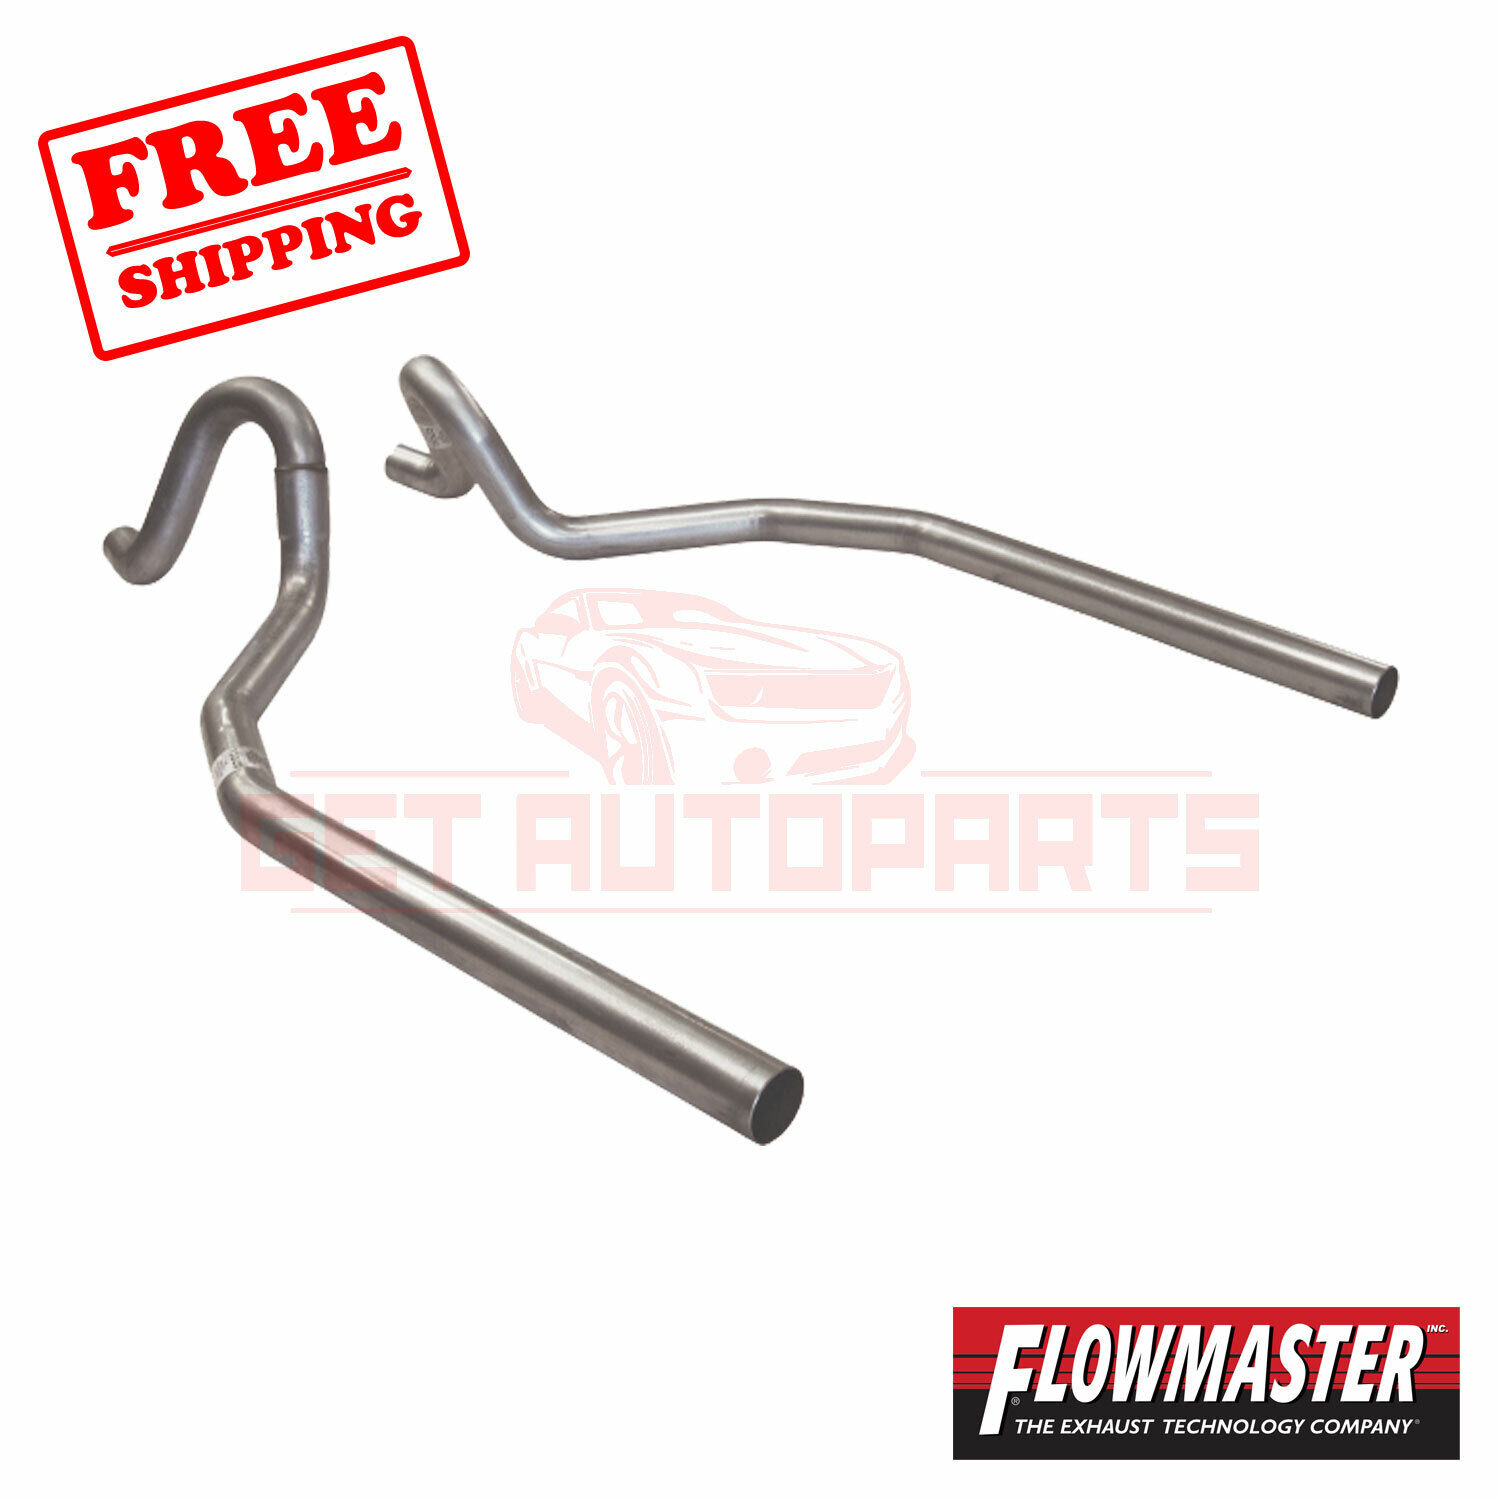 FlowMaster Exhaust Tail Pipe for Chevrolet Monte Carlo 1978-1988